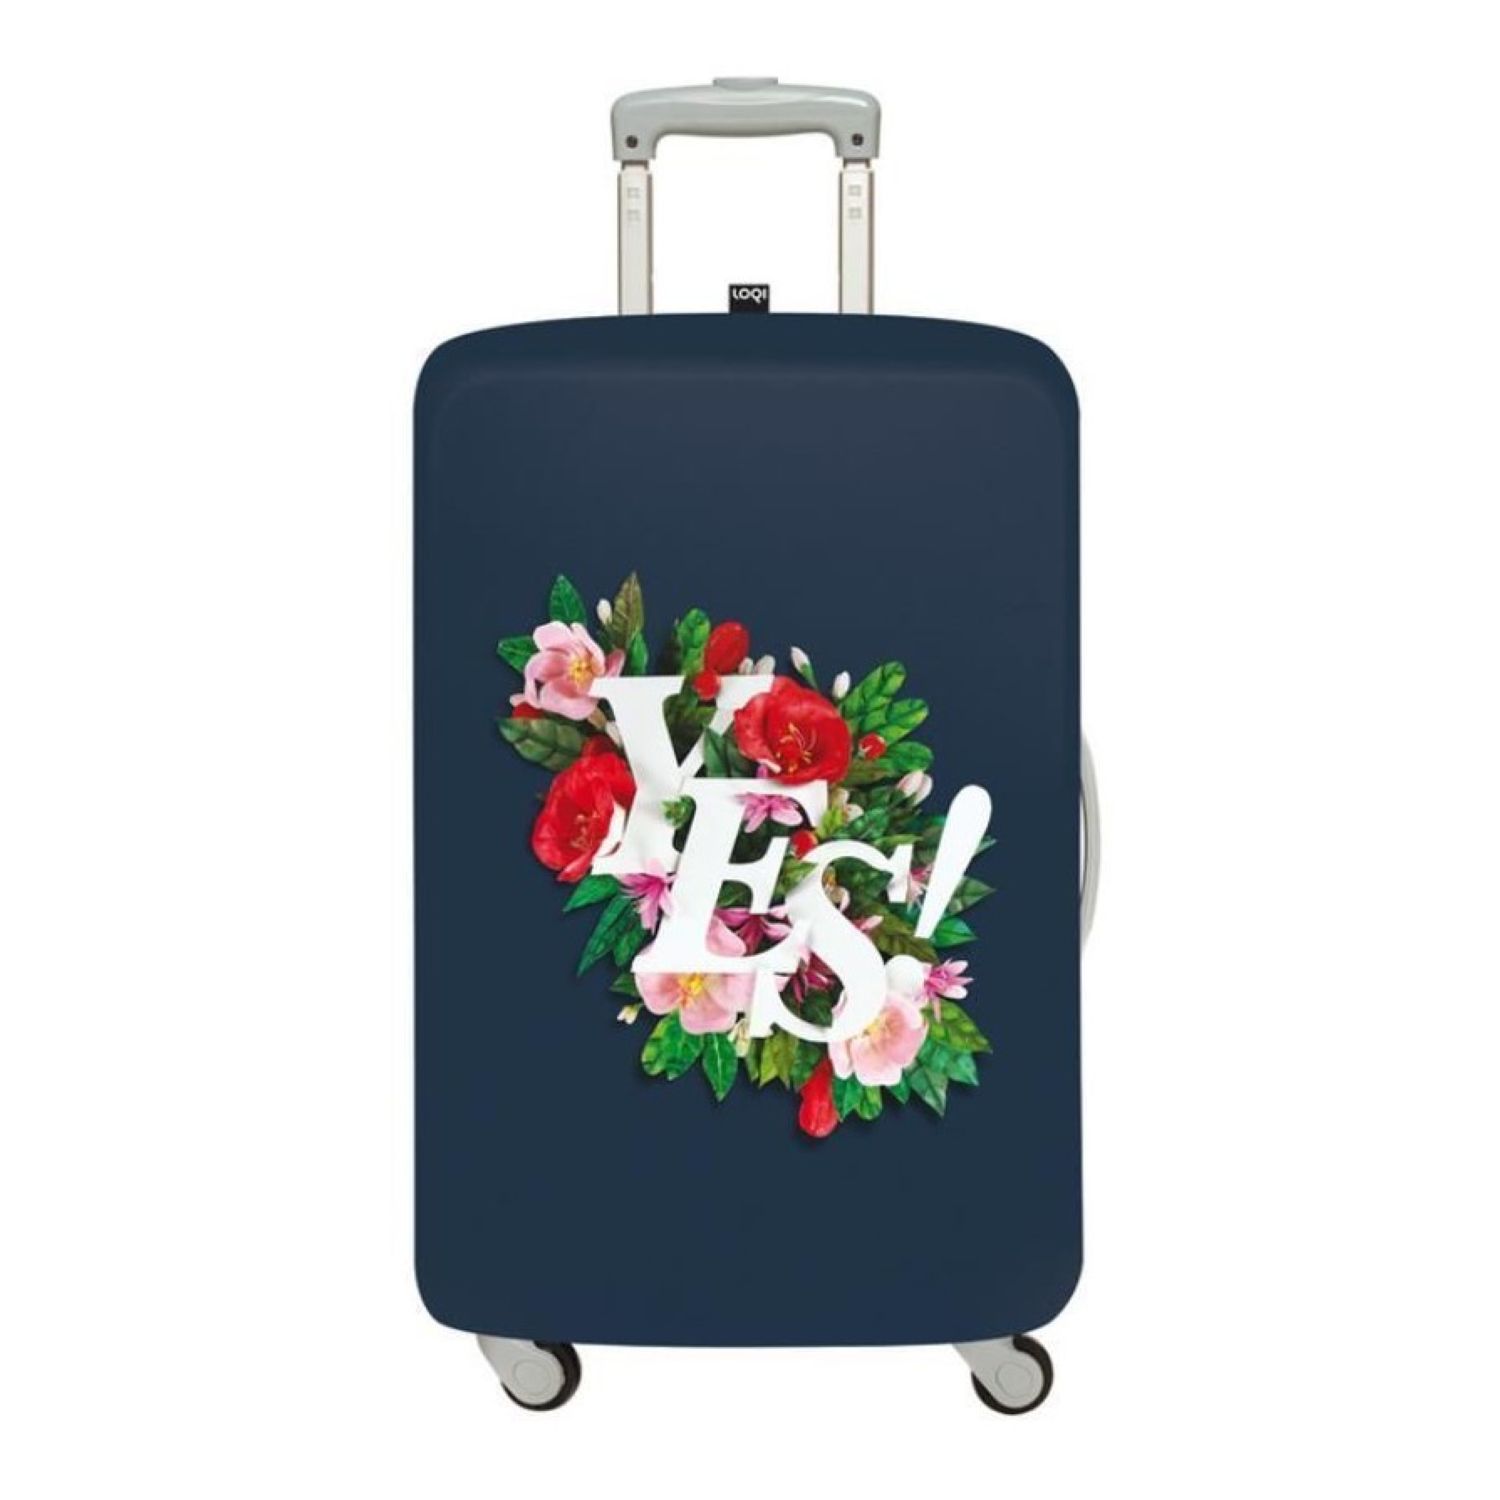 LOQI Airport Arrival Luggage Covers